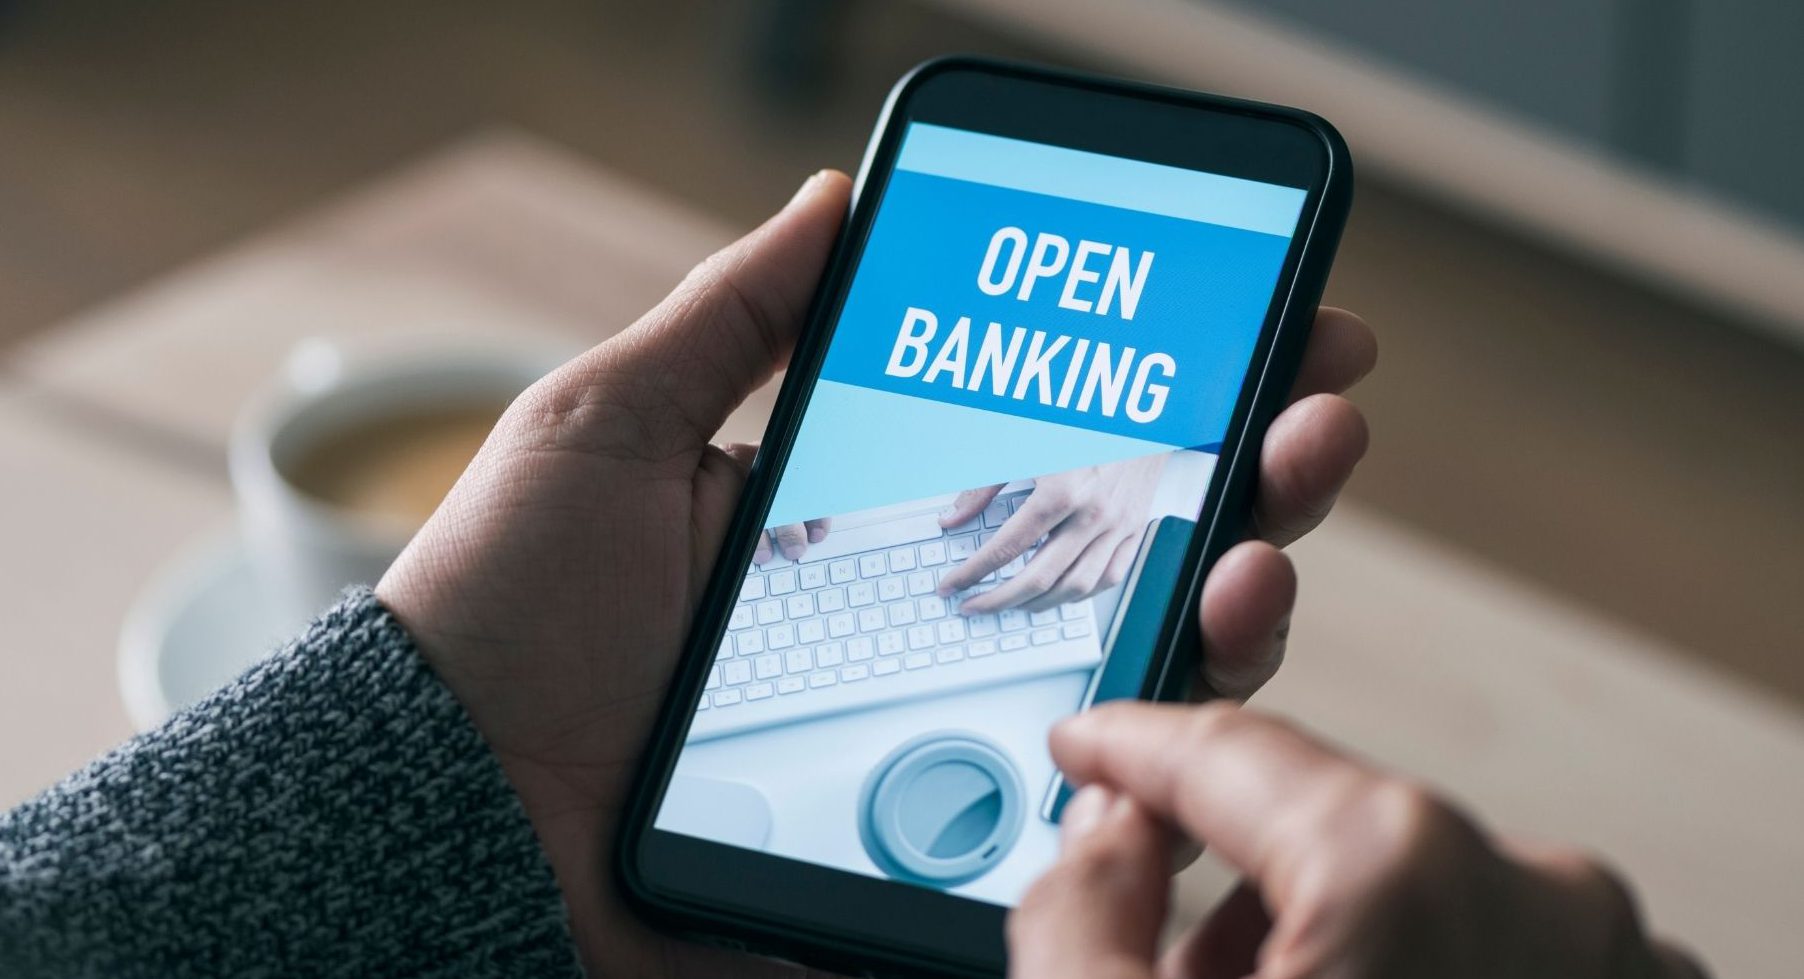 Global Open Banking Market Outlook, Opportunities And Strategies – Includes Open Banking Market Trends